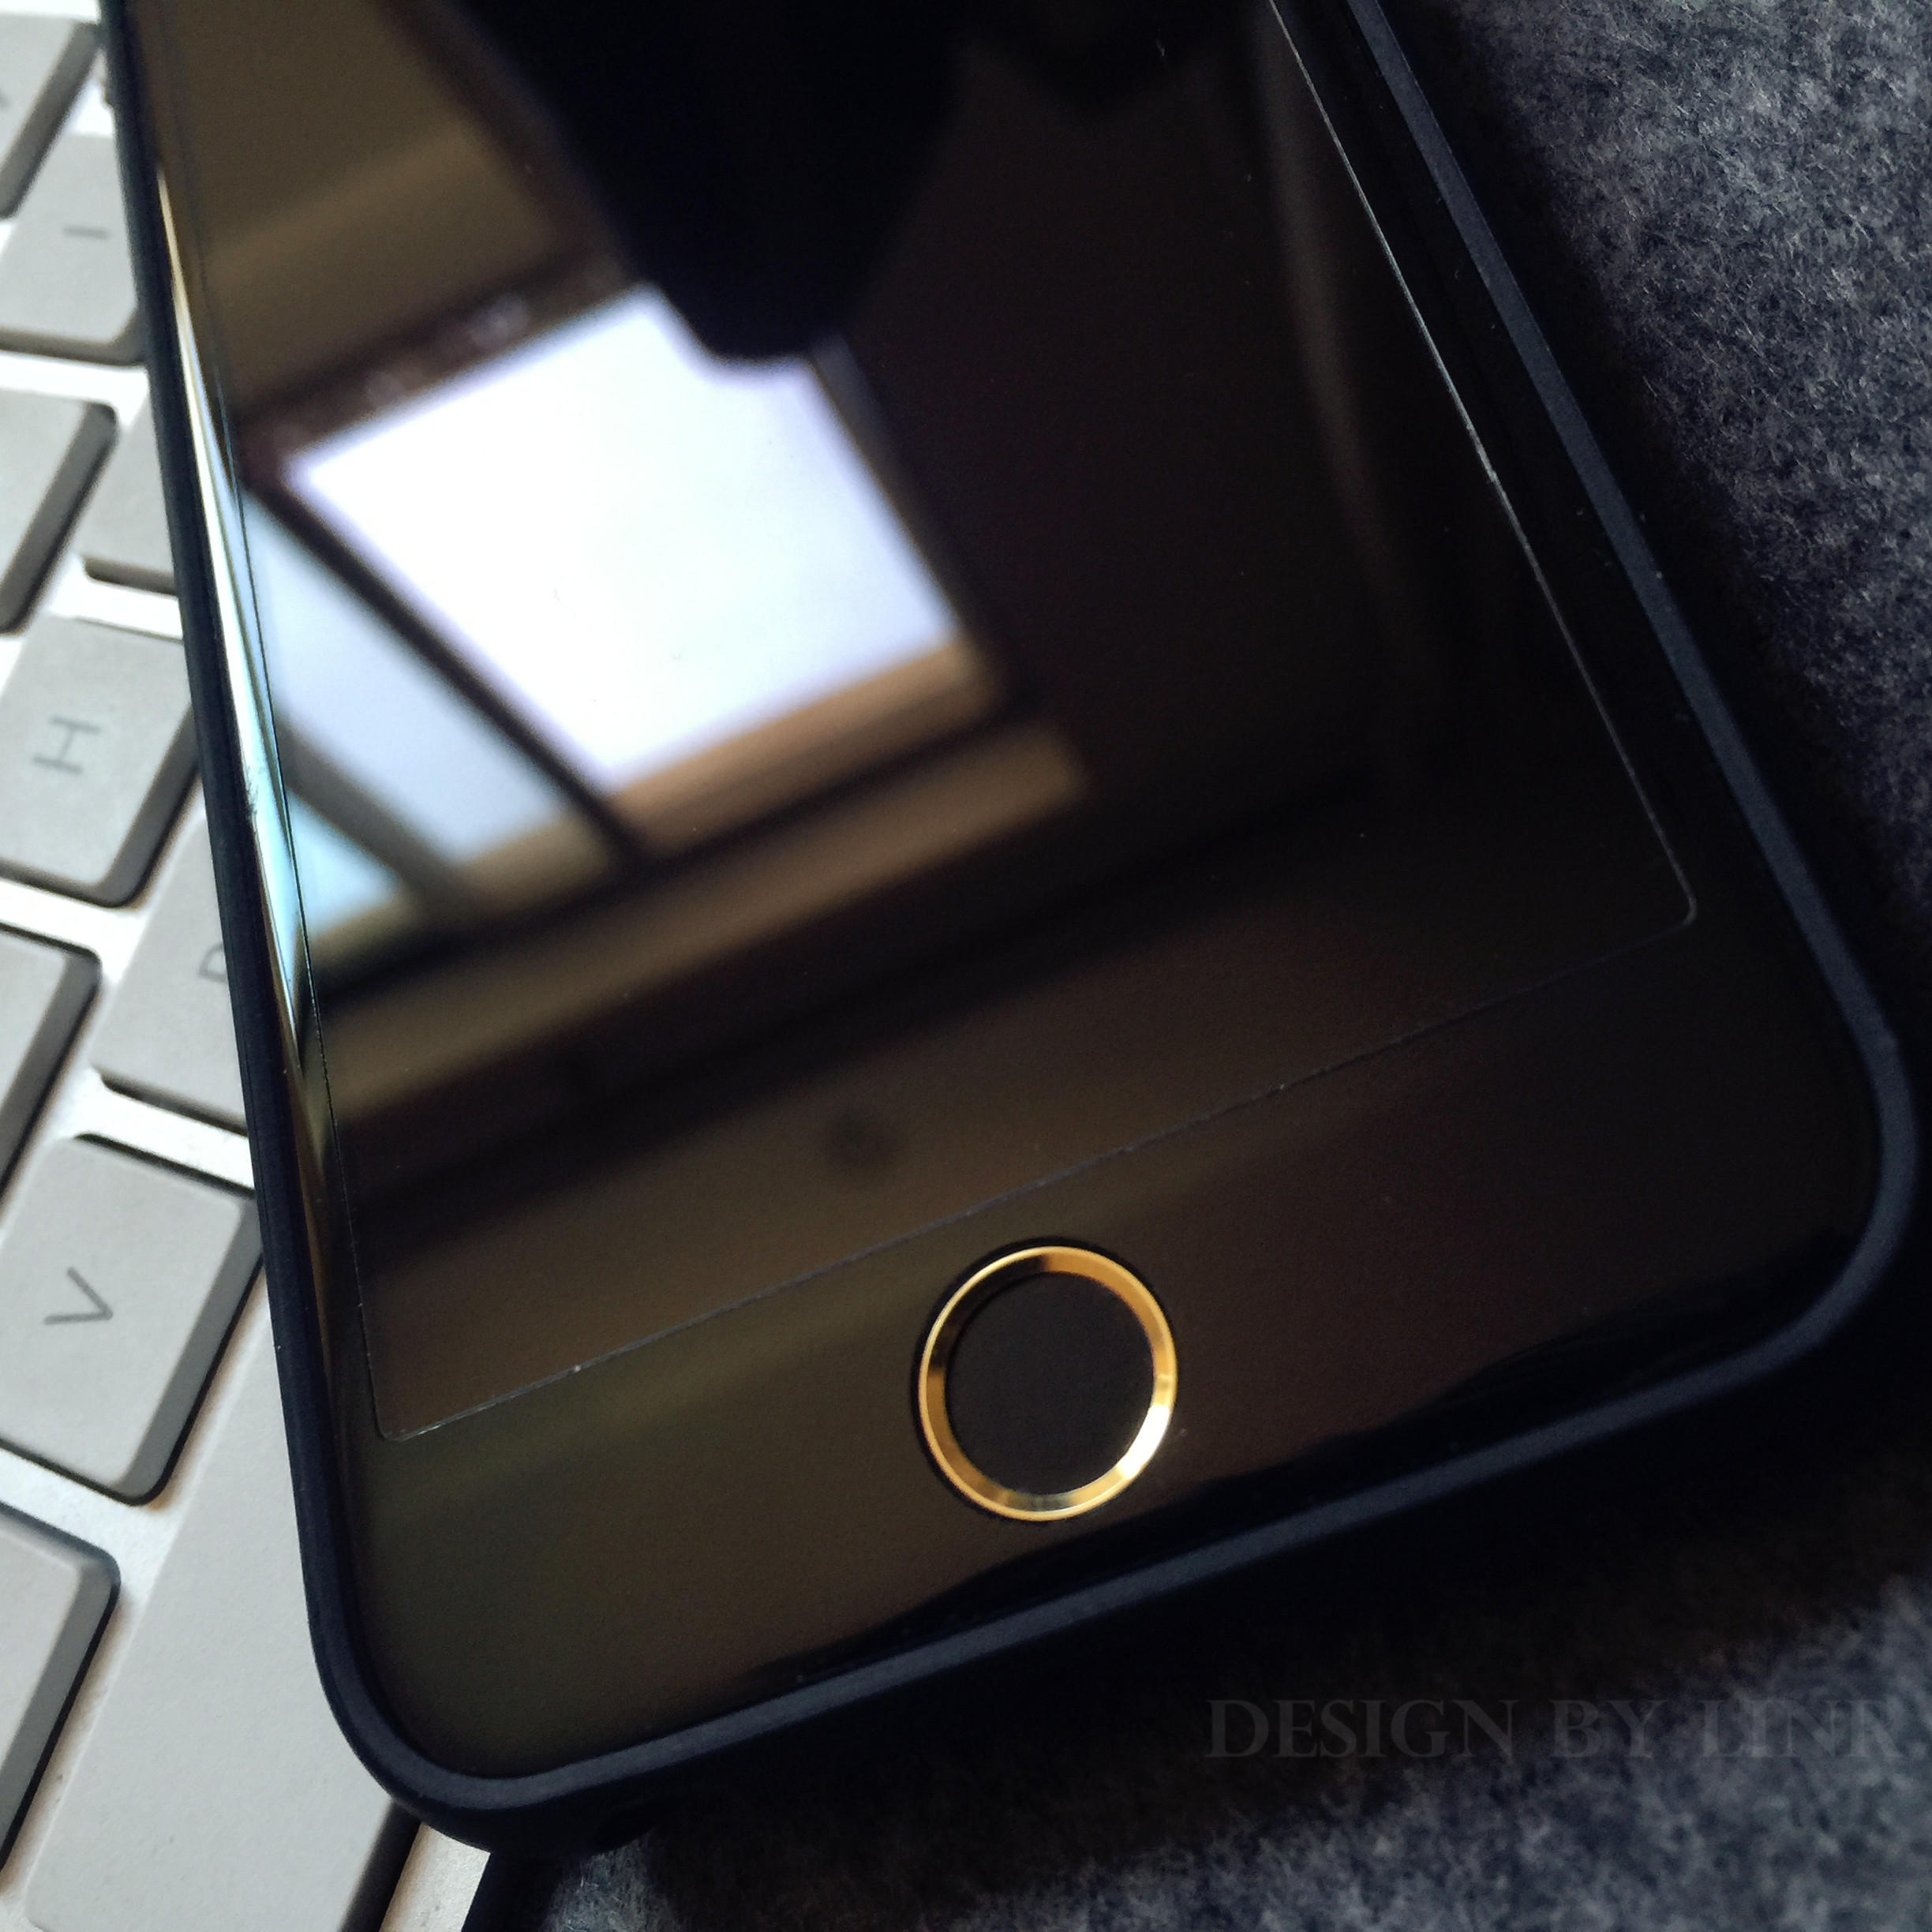 iPhone 4 Home Button Replacement - iFixit Repair Guide